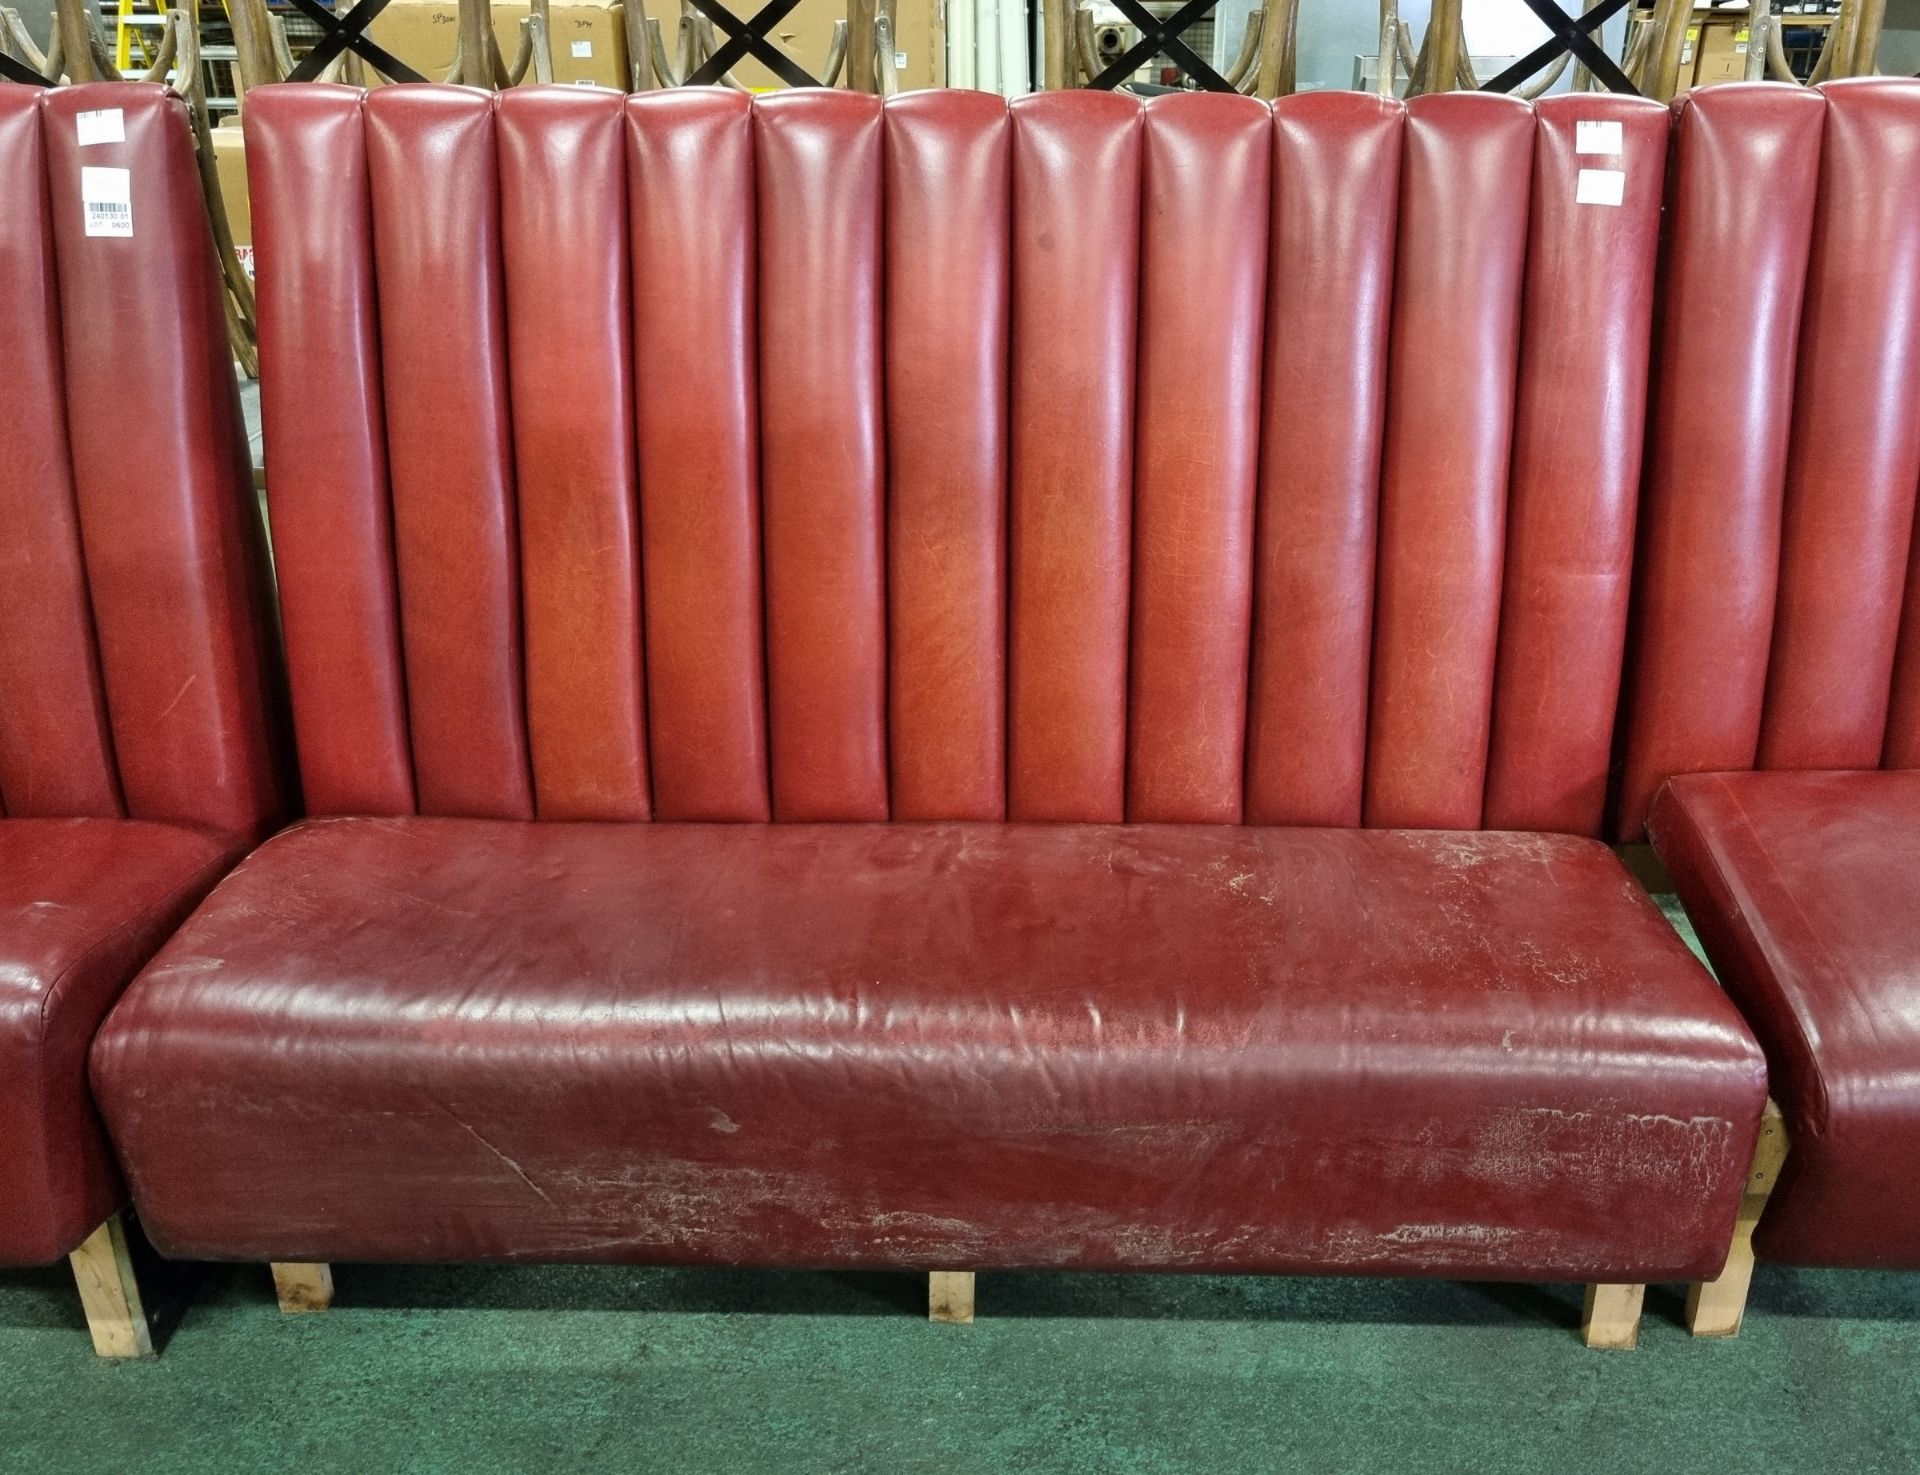 Red leather padded bench seating - Bild 3 aus 4